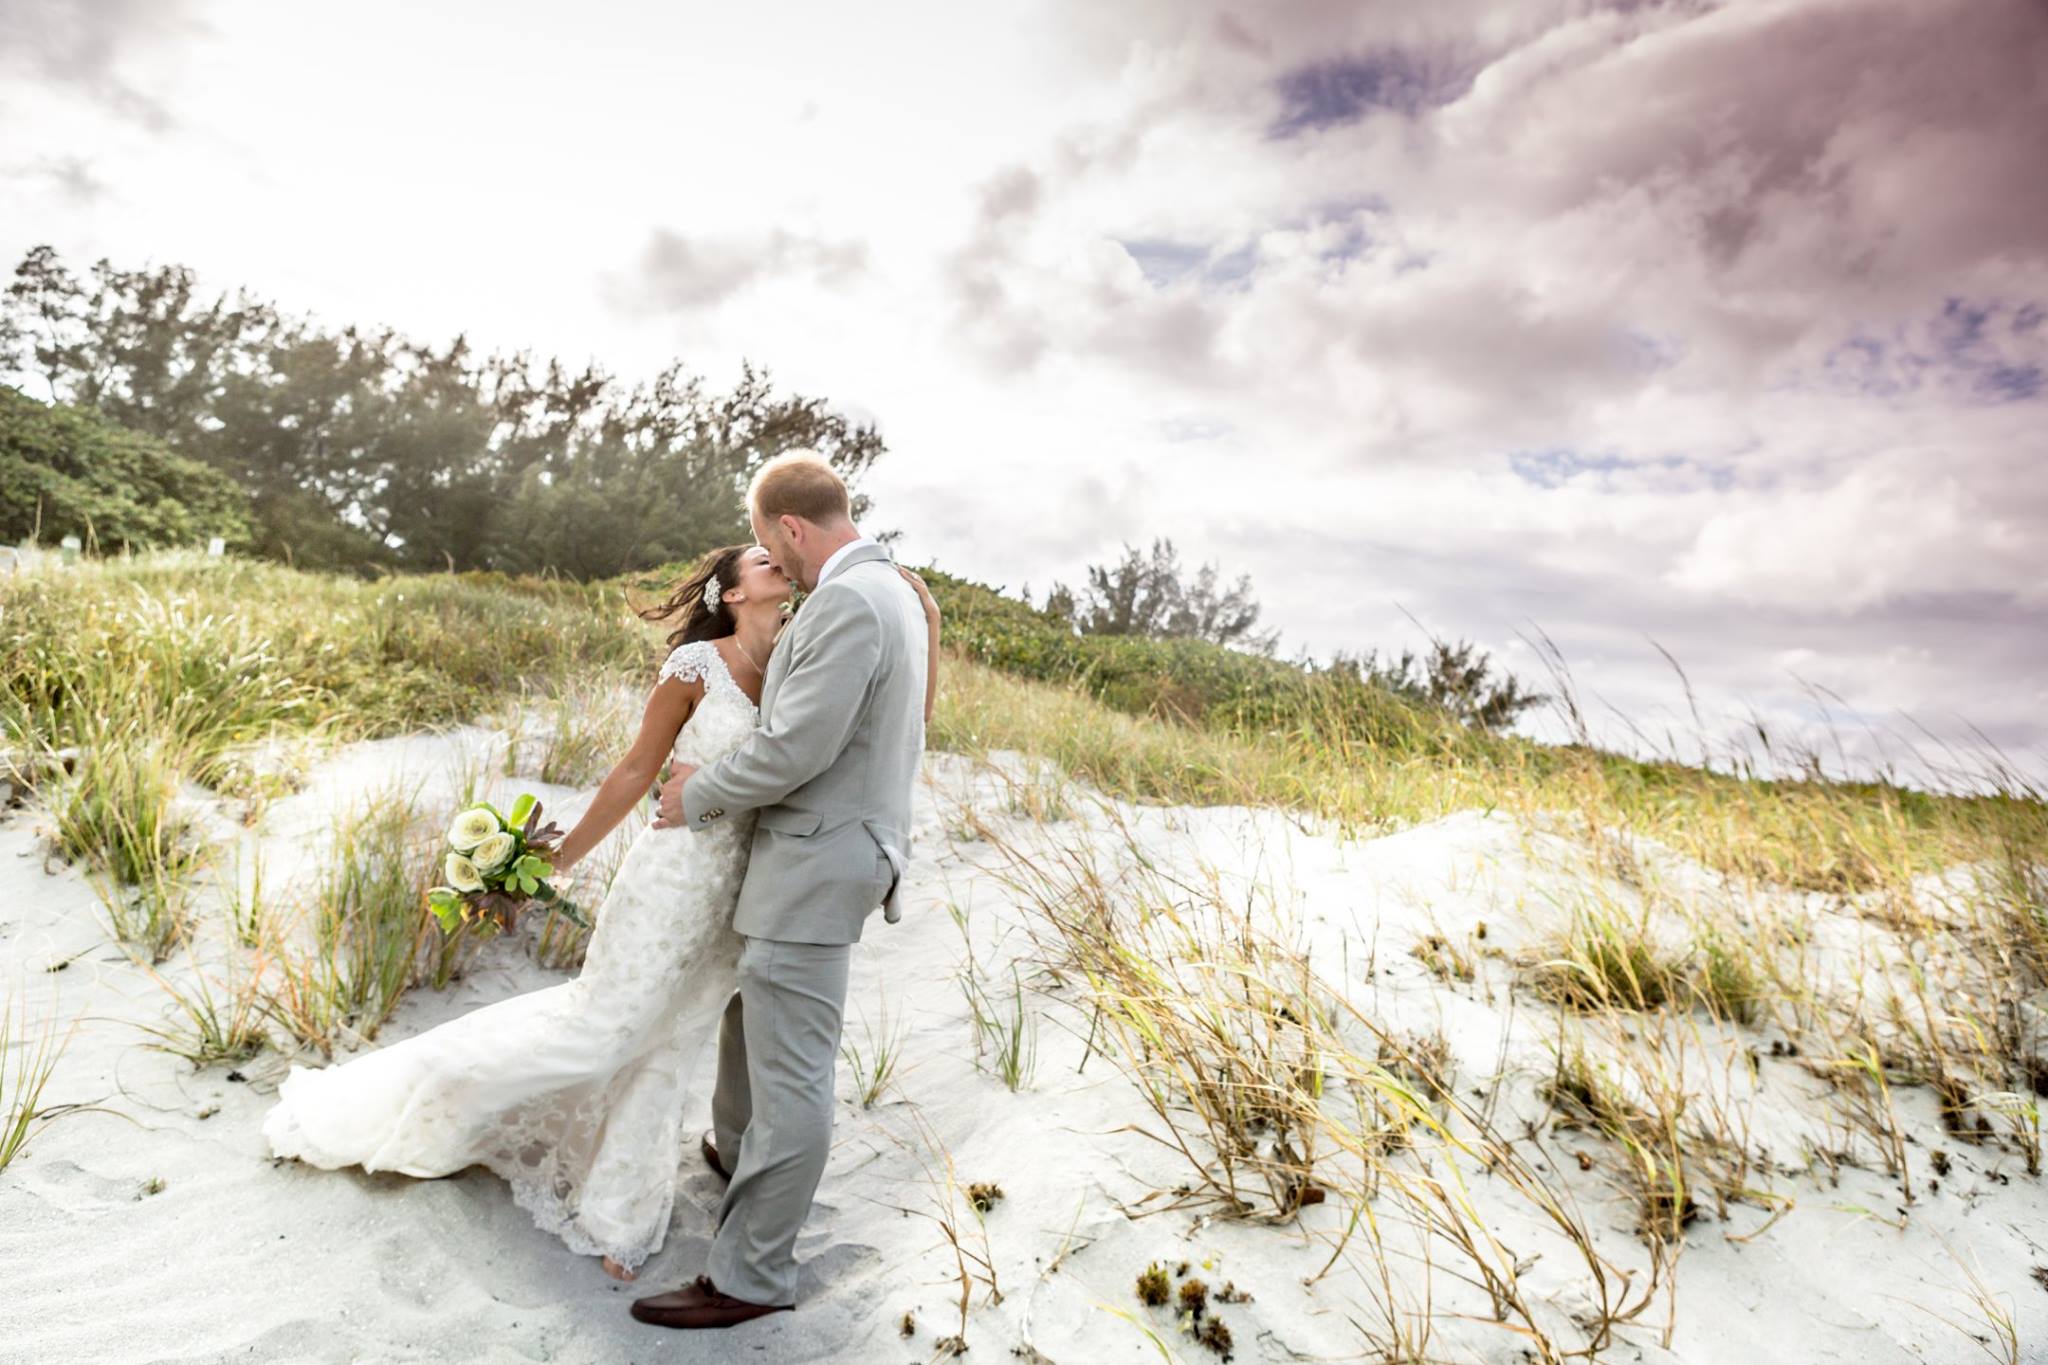 Wedding Photography Videography image of bride and groom on Delray Beach after wedding day ceremony by Fort Lauderdale Photographer Alfredo Valentine Couture Bridal Photography